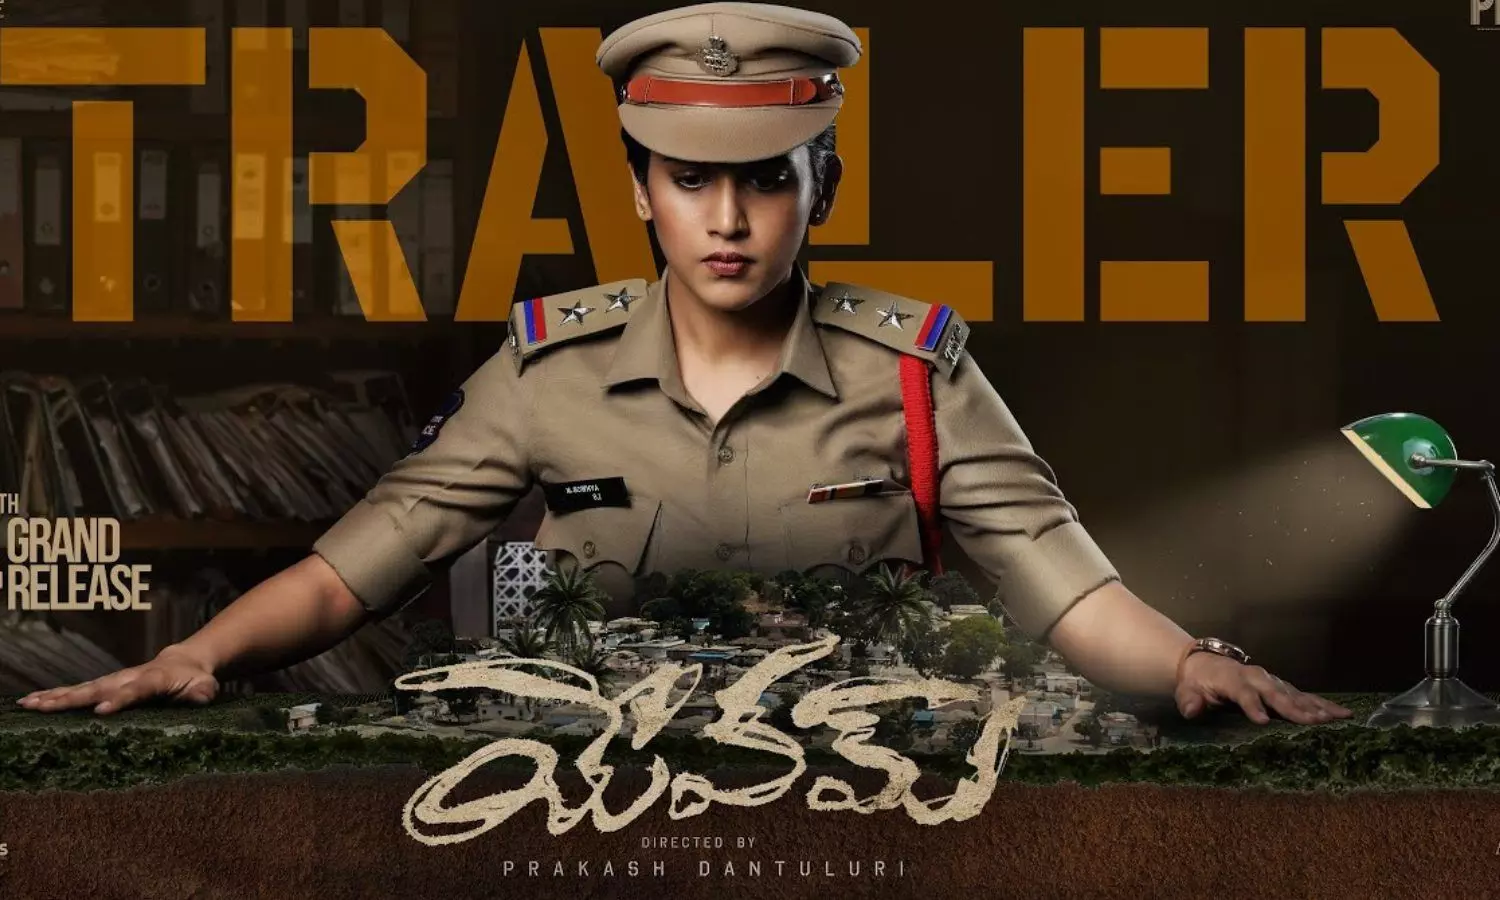 ‘Yevam’ Trailer: Chandini Chowdary as a fierce cop steals the show